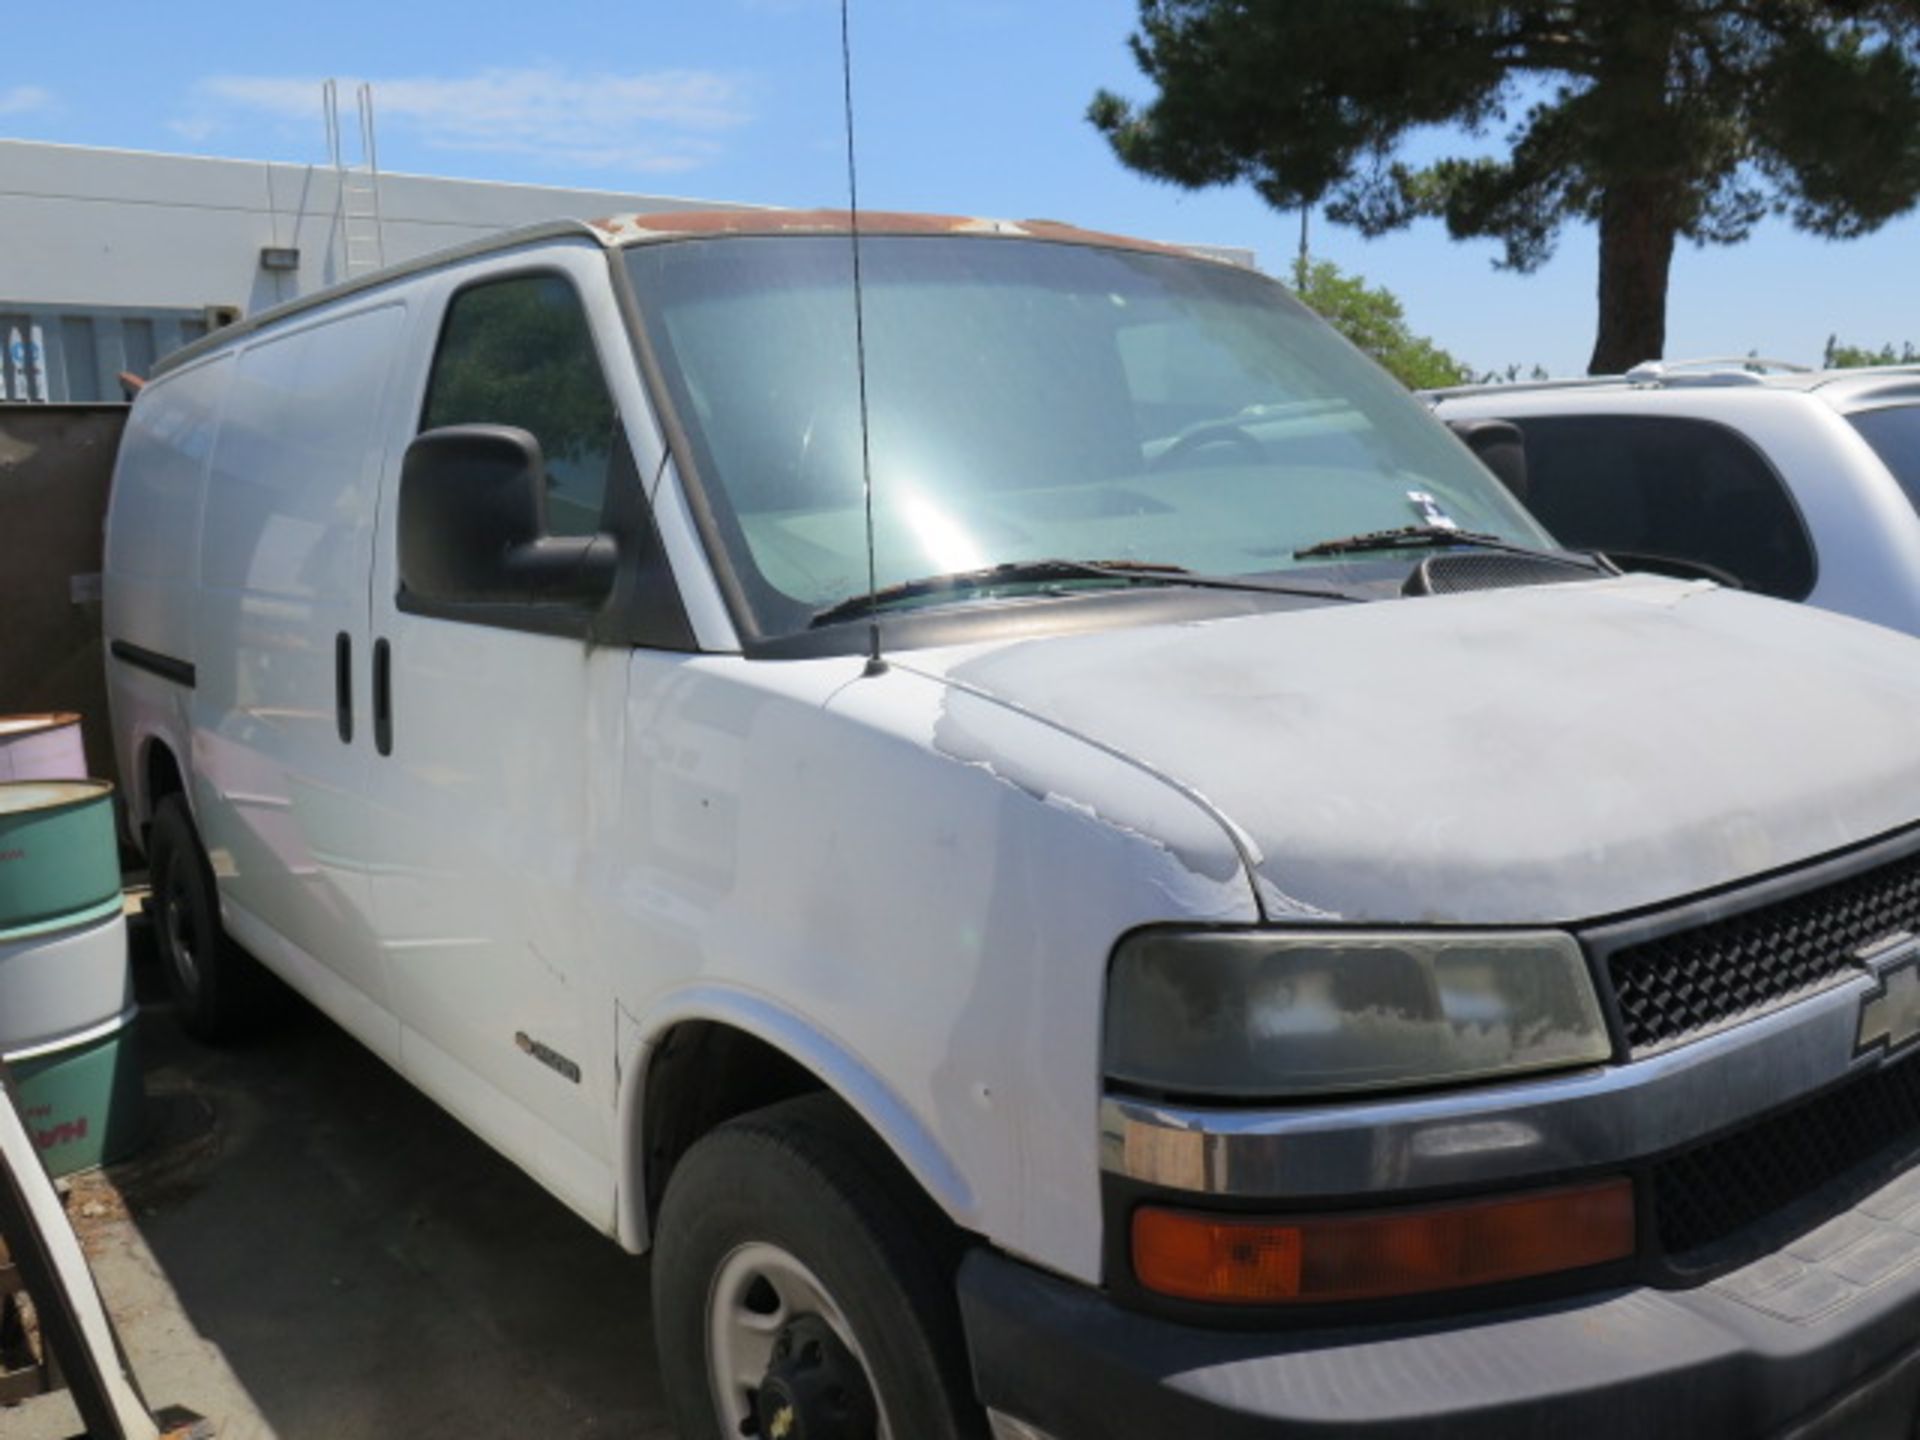 2006 Chevrolet 2500 Express Carbo Van (NEEDS NEW ENGINE) Lisc# 7X59077 w/ Auto Trans, SOLD AS IS - Image 3 of 7